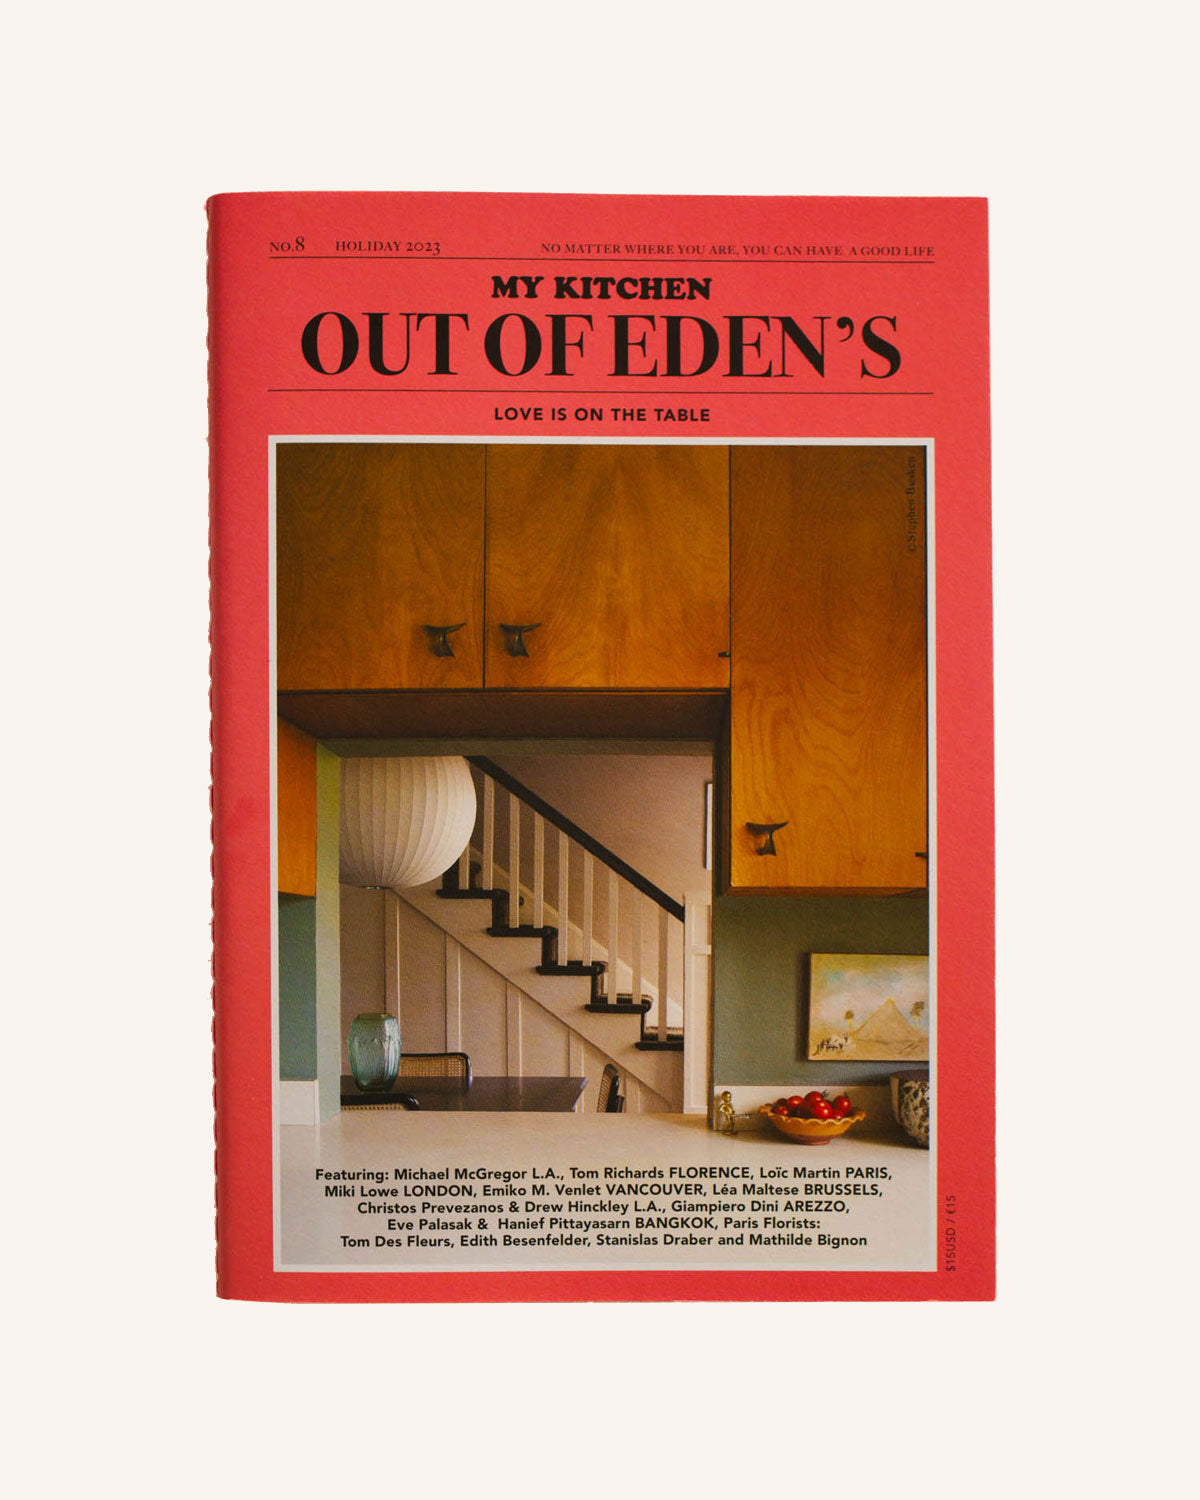 MY KITCHEN OUT OF EDEN MAGAZINE No.8 - Shelter Social Club